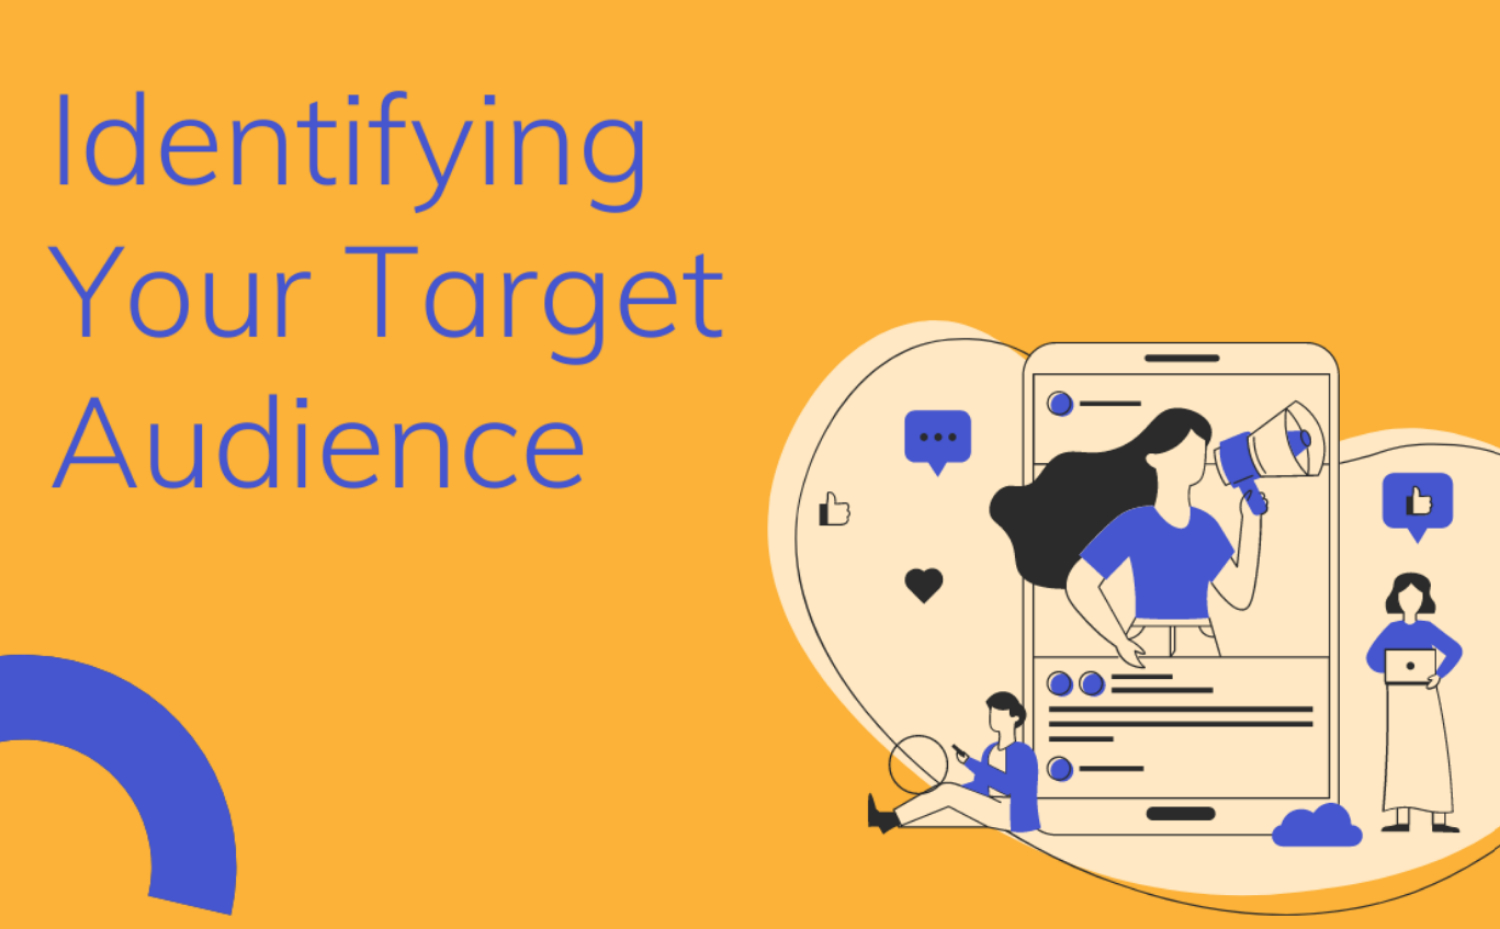 identify your target audience